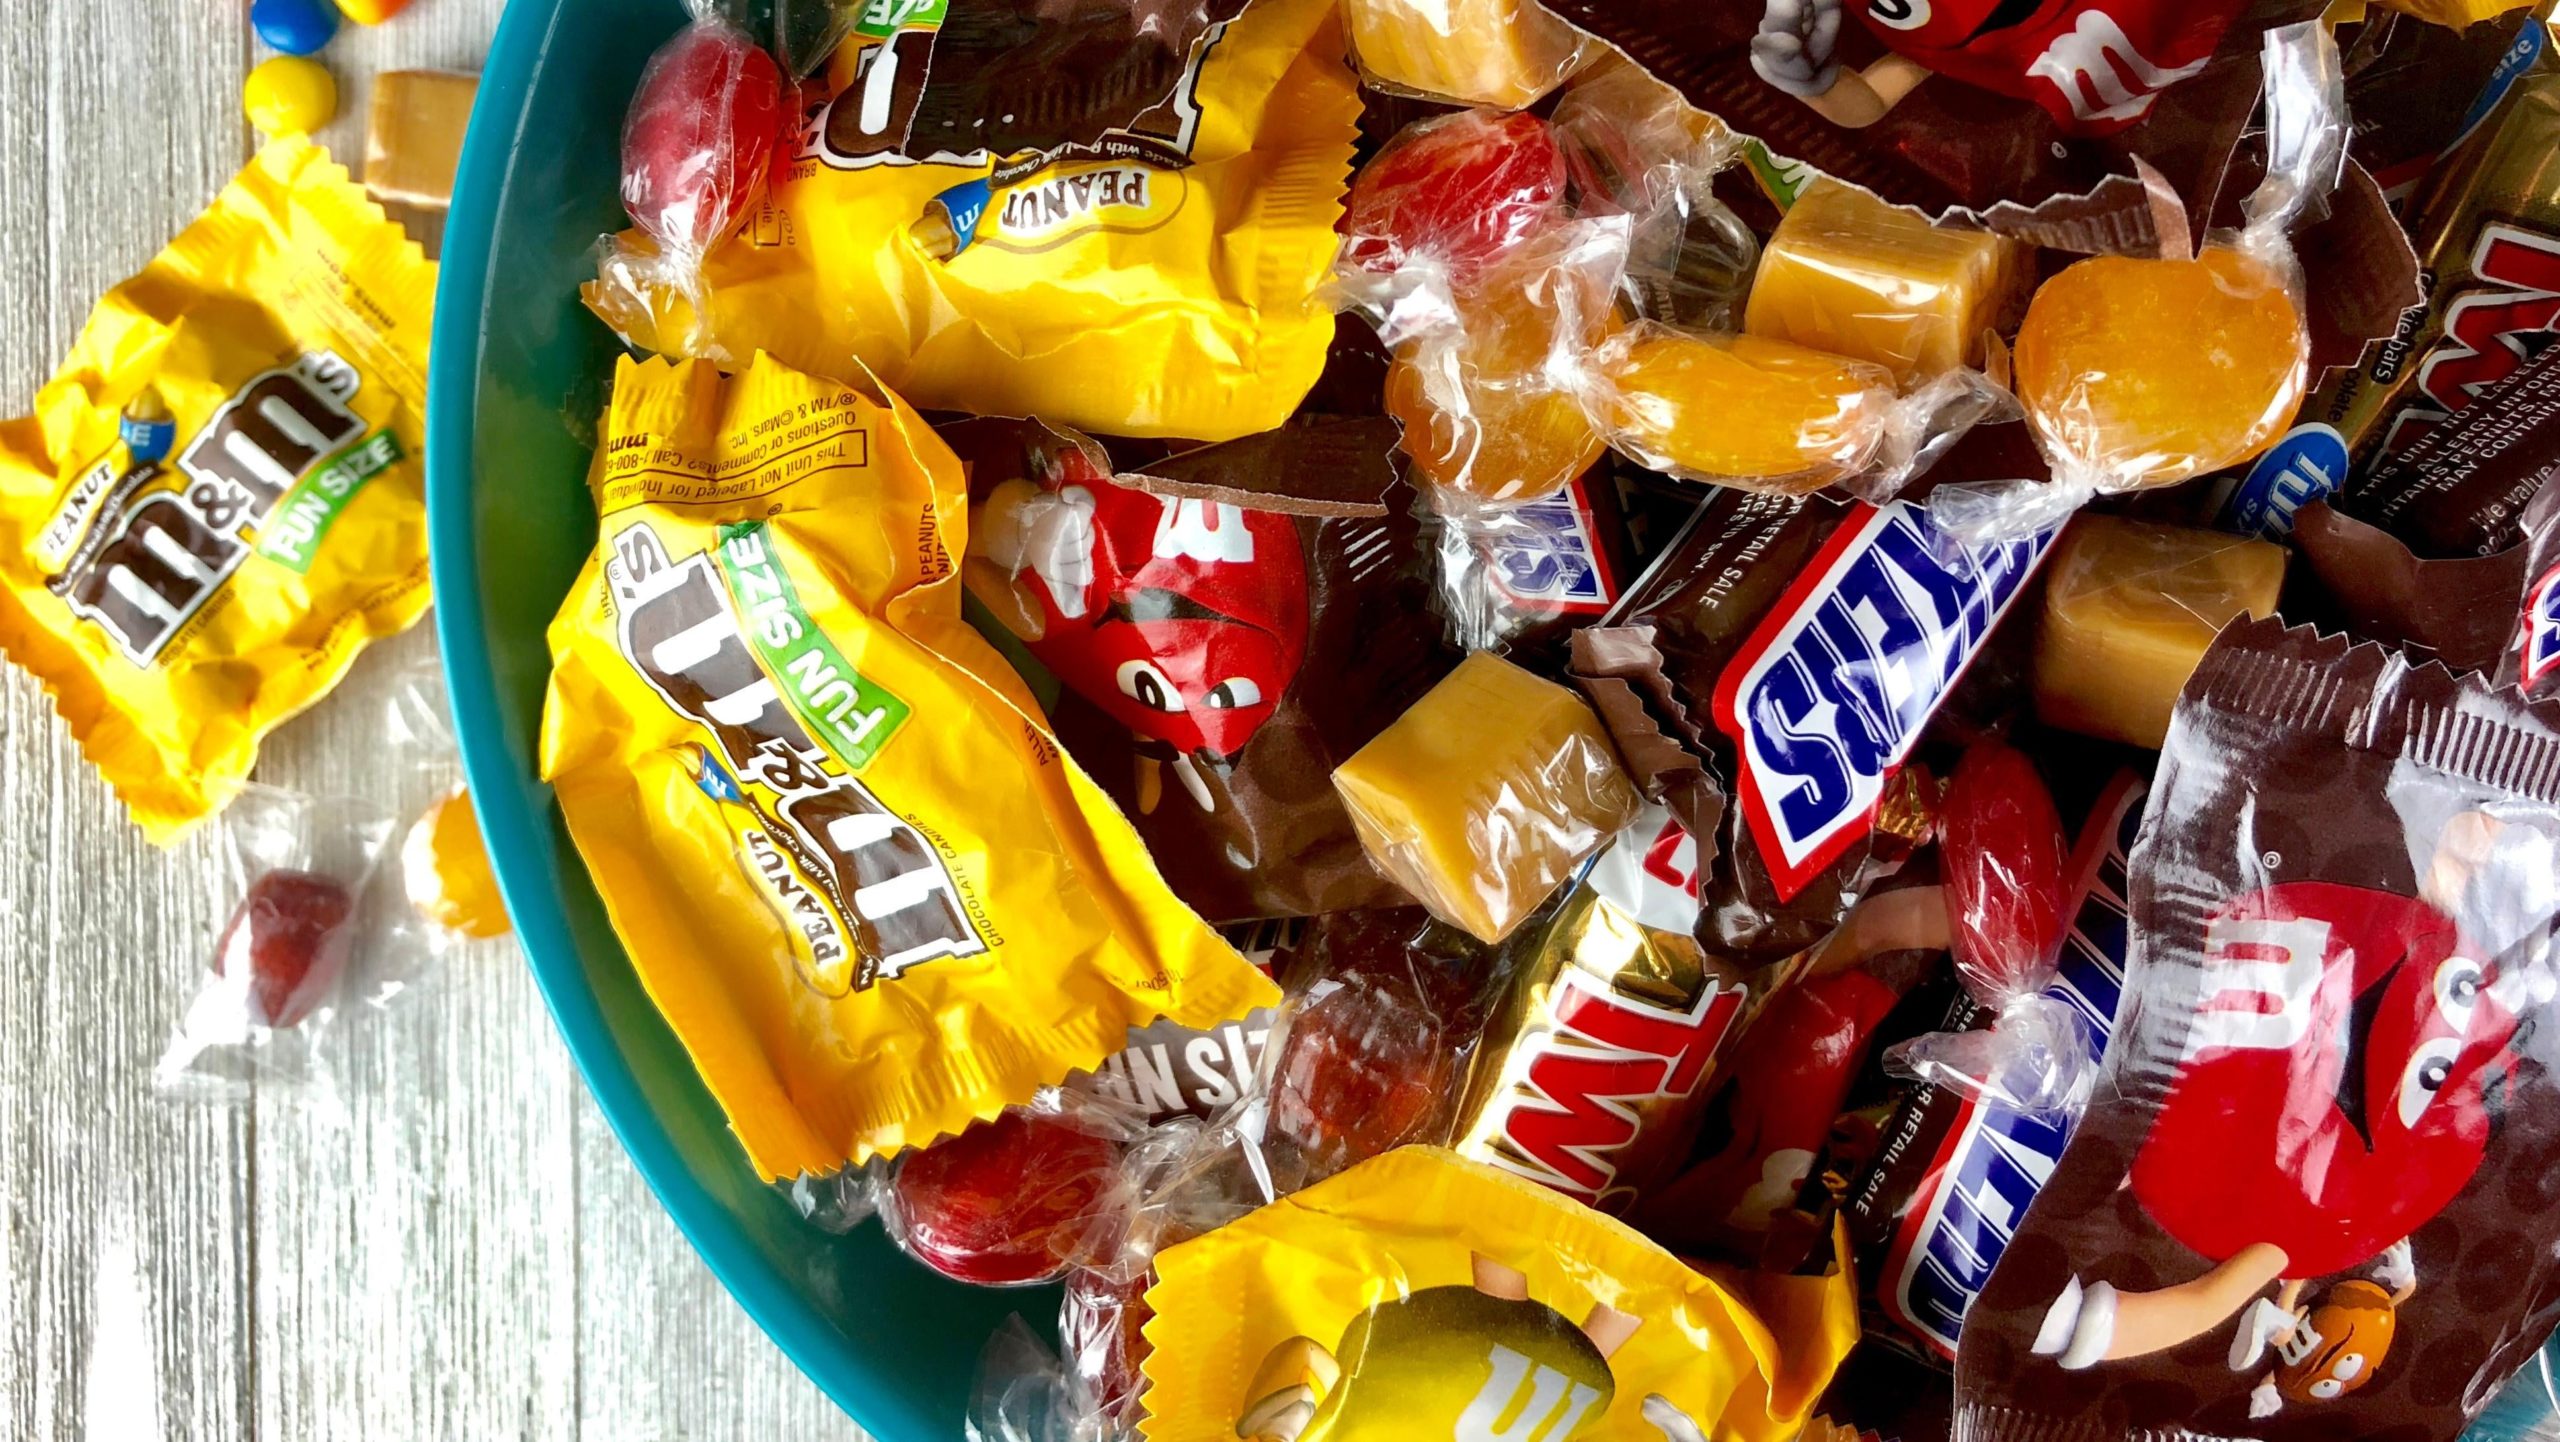 How Long Does Halloween Candy Last?